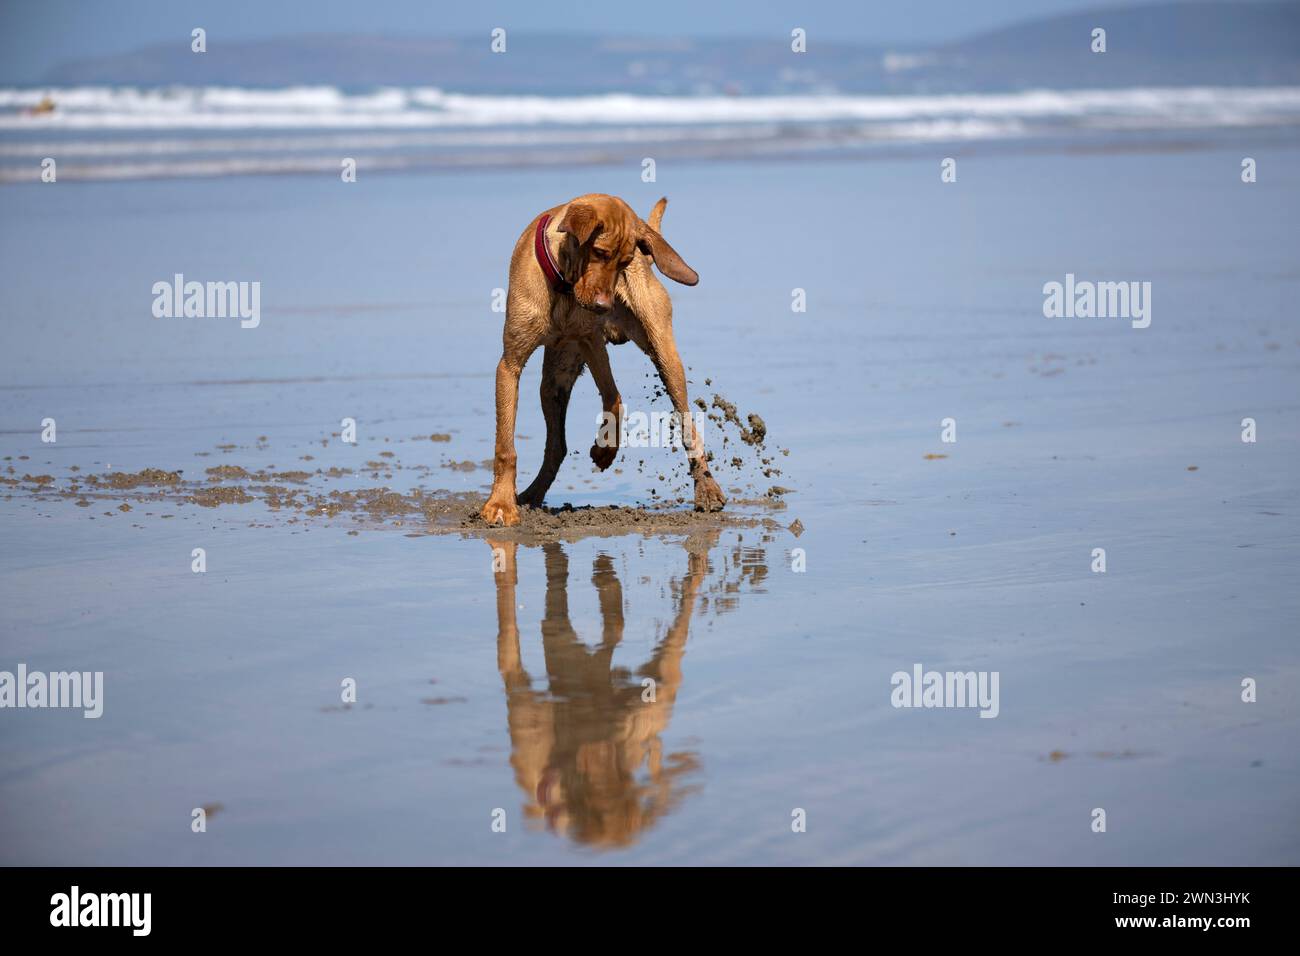 20/04/22   Eight-month-old Hungarian Vizsla puppy, Moreton, digs a hole in wet sand on Westward Ho! beach, North Devon.  All Rights Reserved: F Stop P Stock Photo